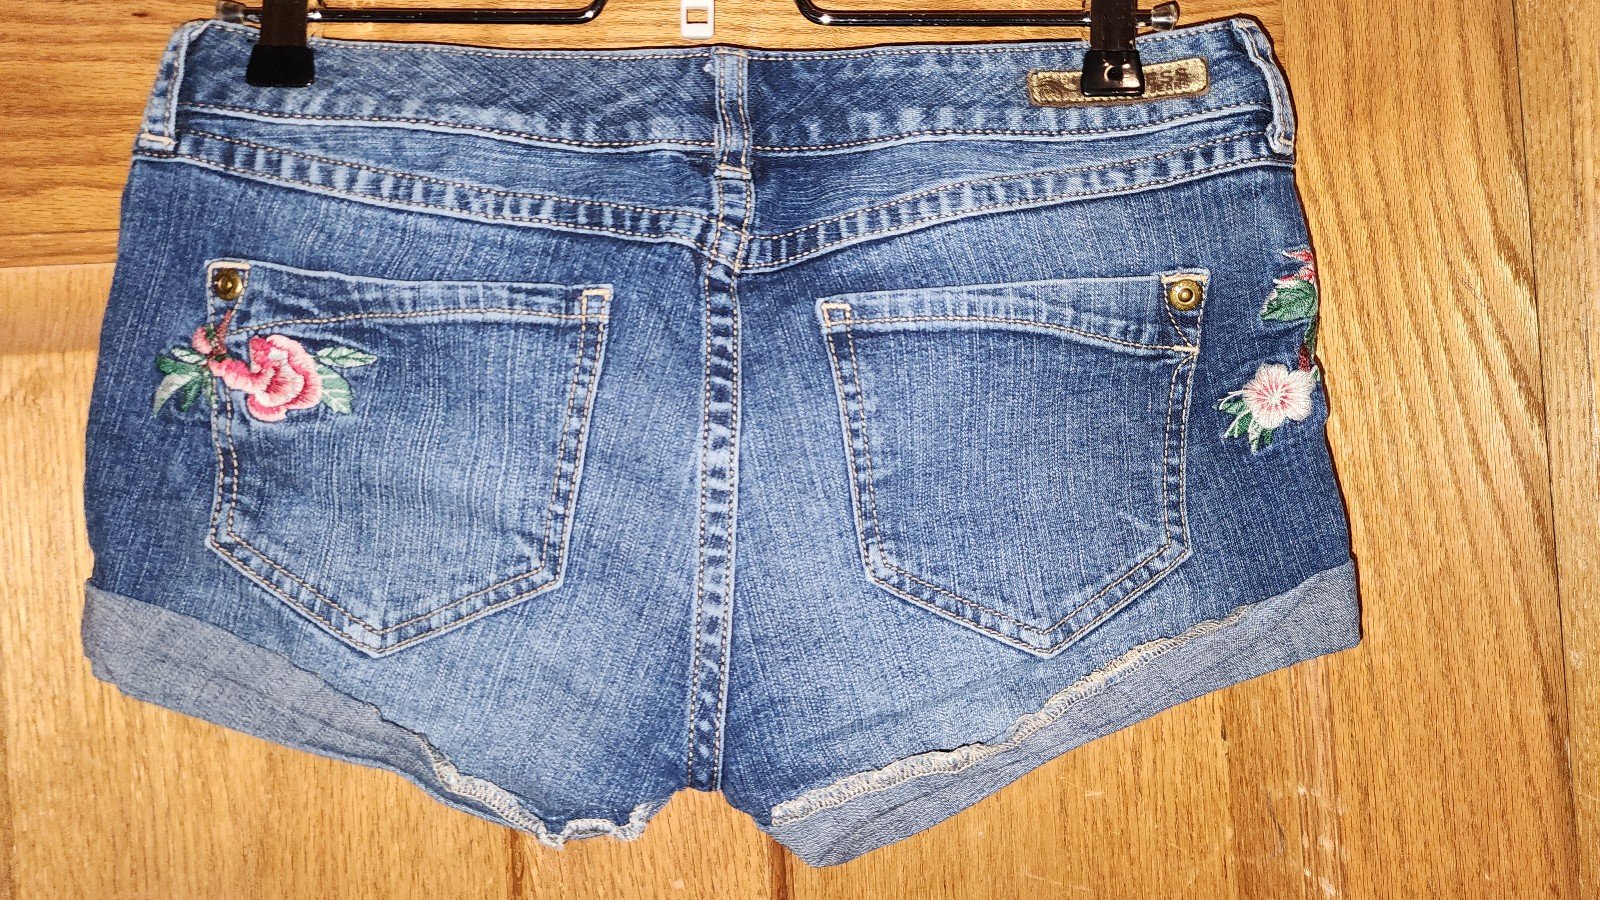 Cheap Express Floral Embroidered Stitched Denim Short Shorts Hippie Front Pockets Sewn pmL0ZZ0Hb Cool